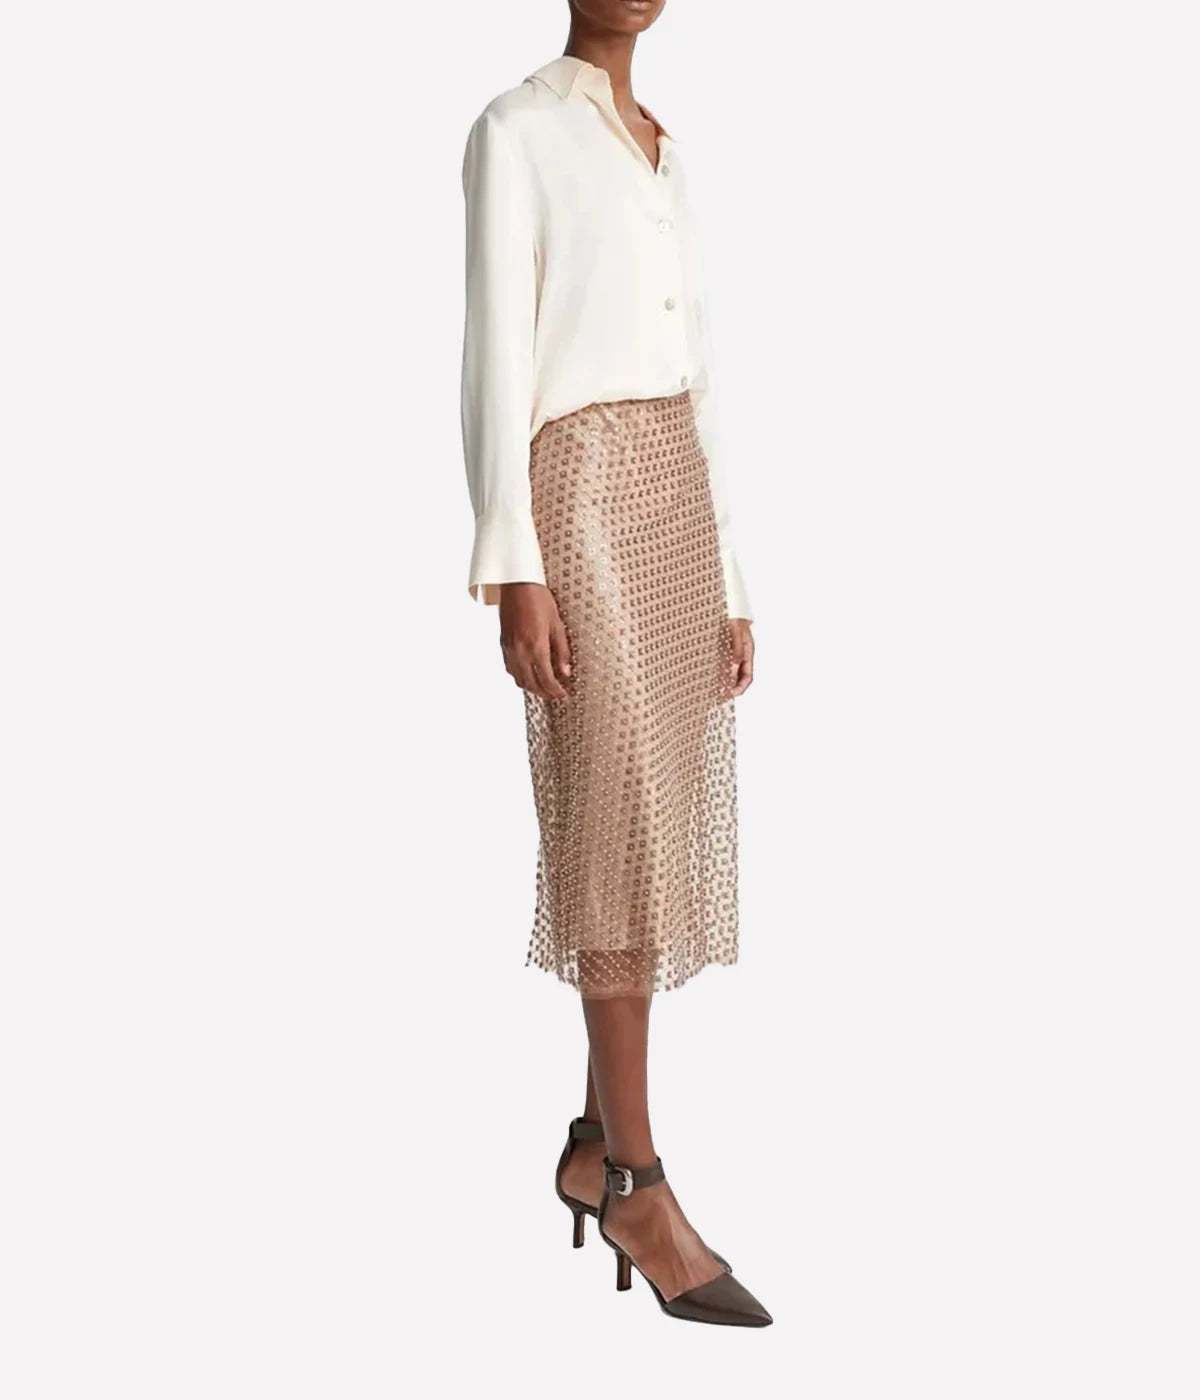 Beaded Sequin Skirt in Fawn